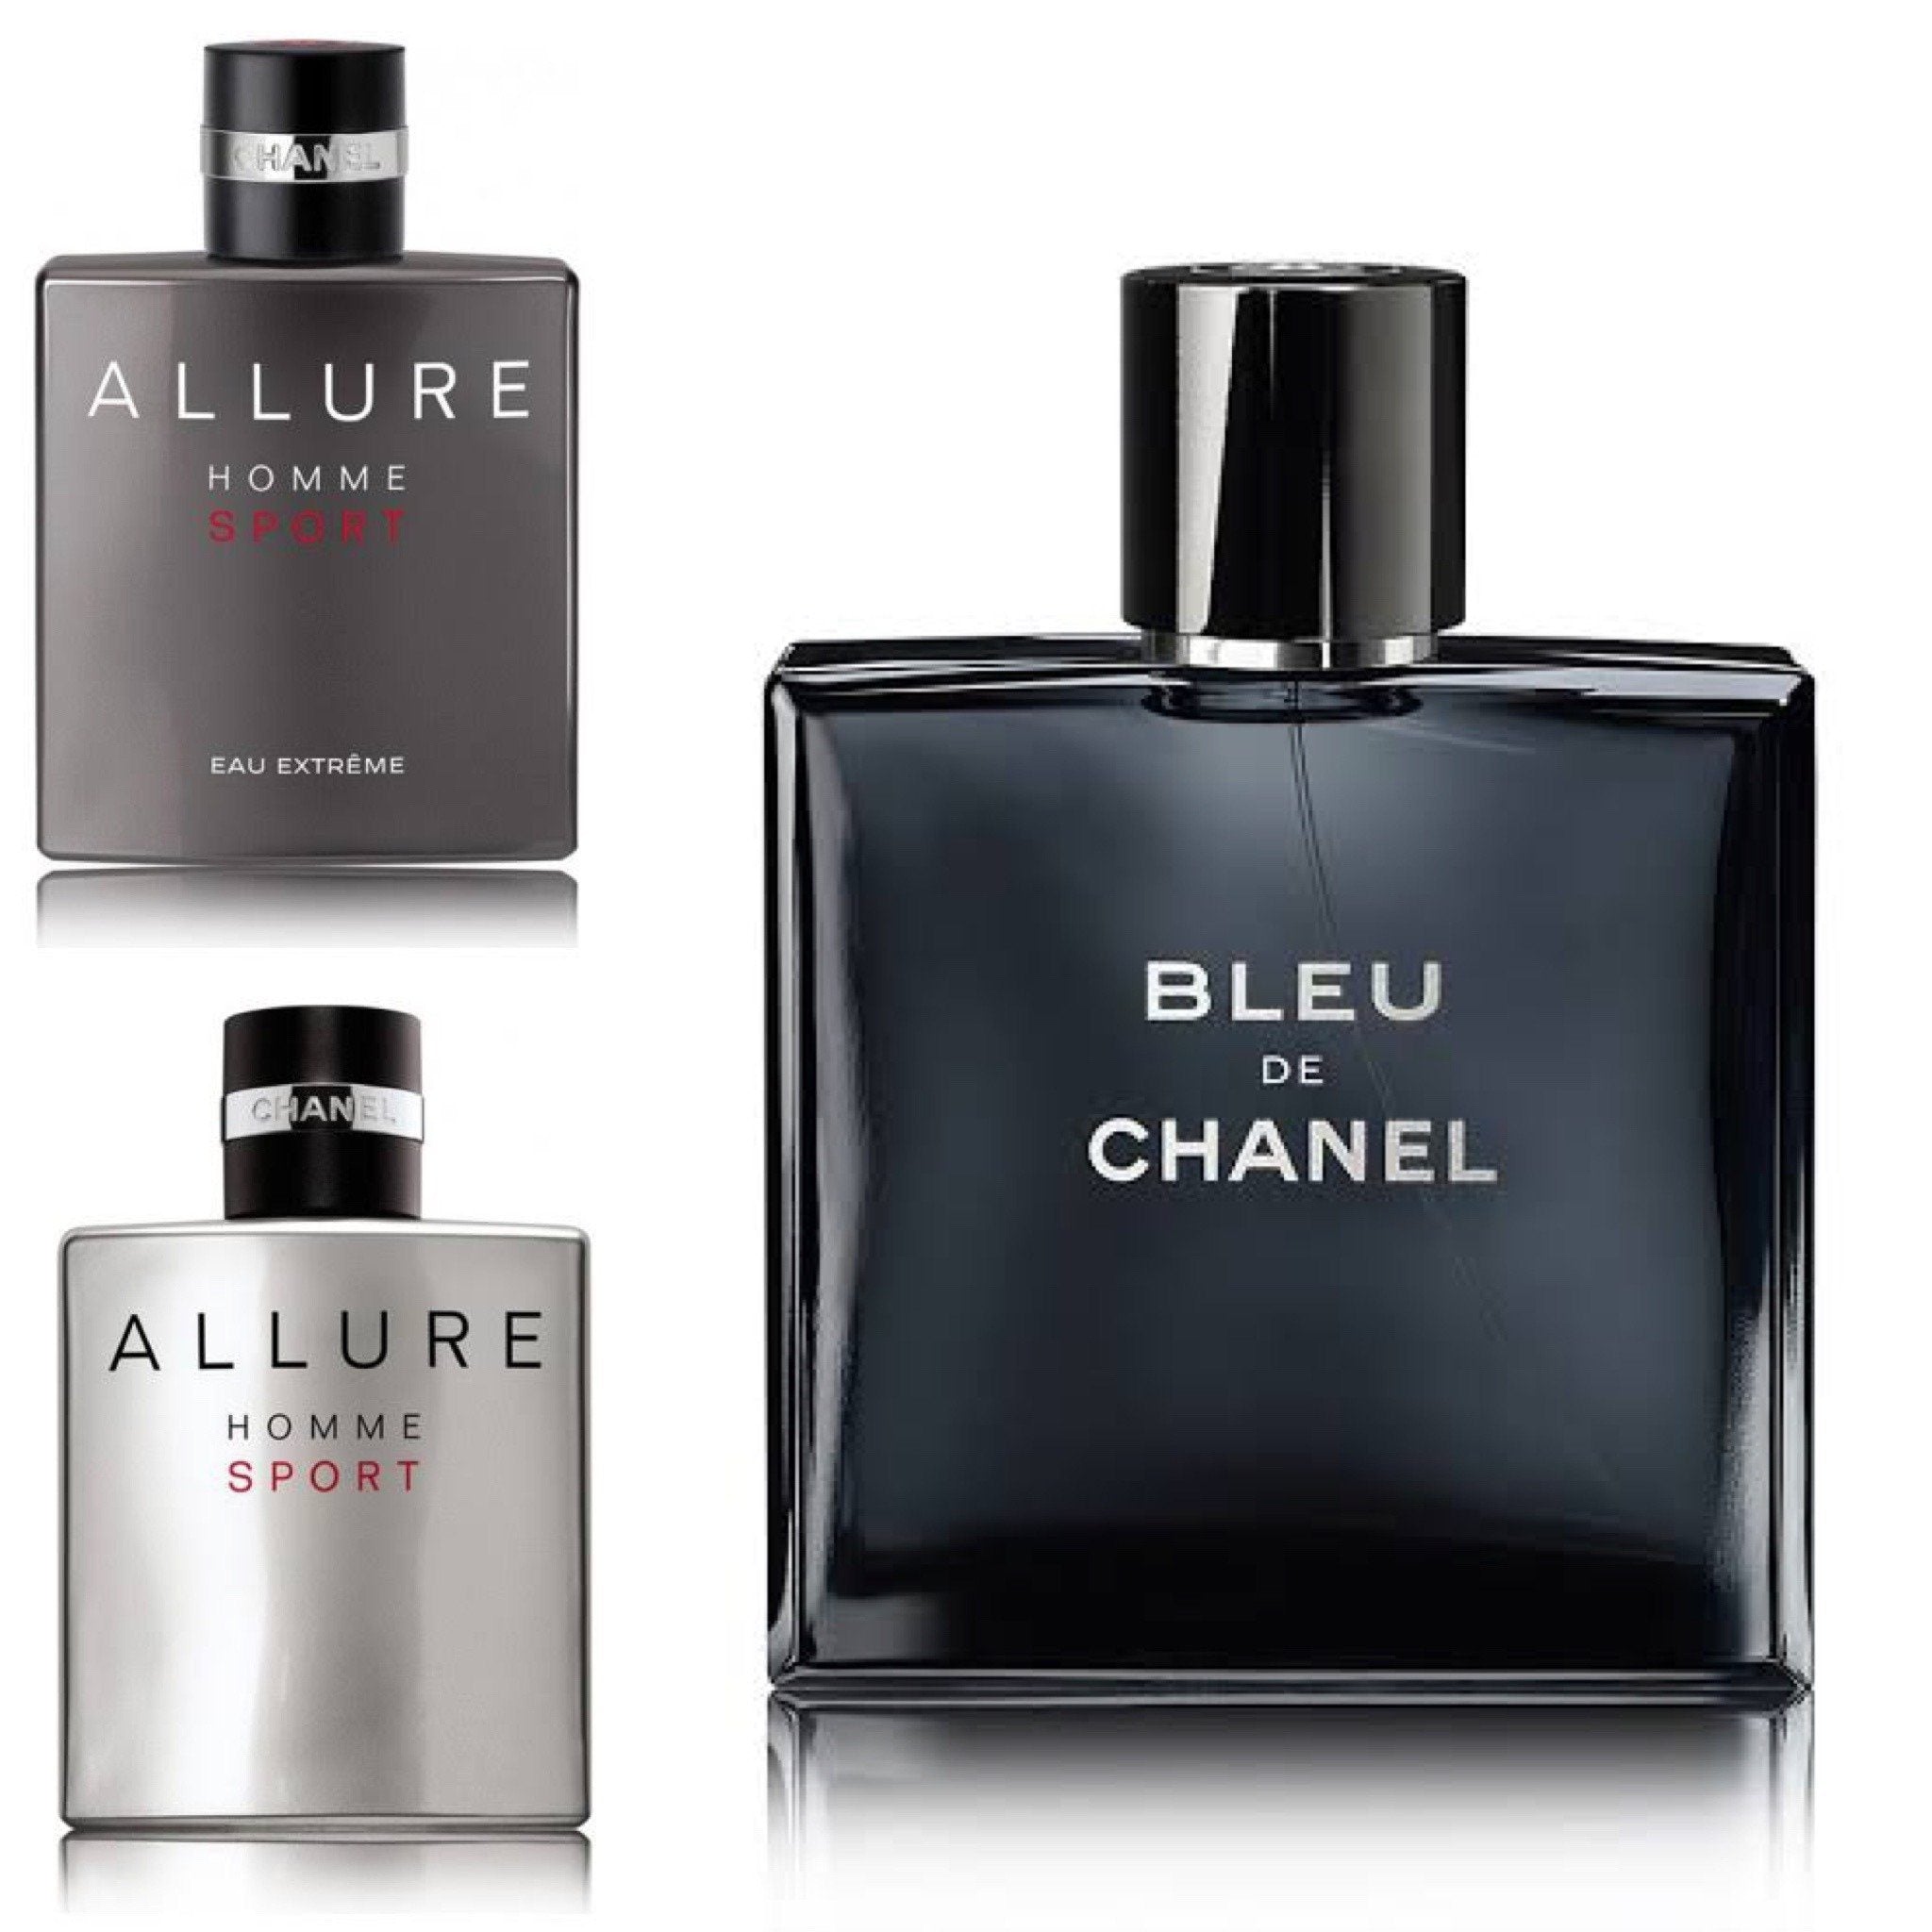 Chanel's Exclusive Set – Dreamy Fragrance